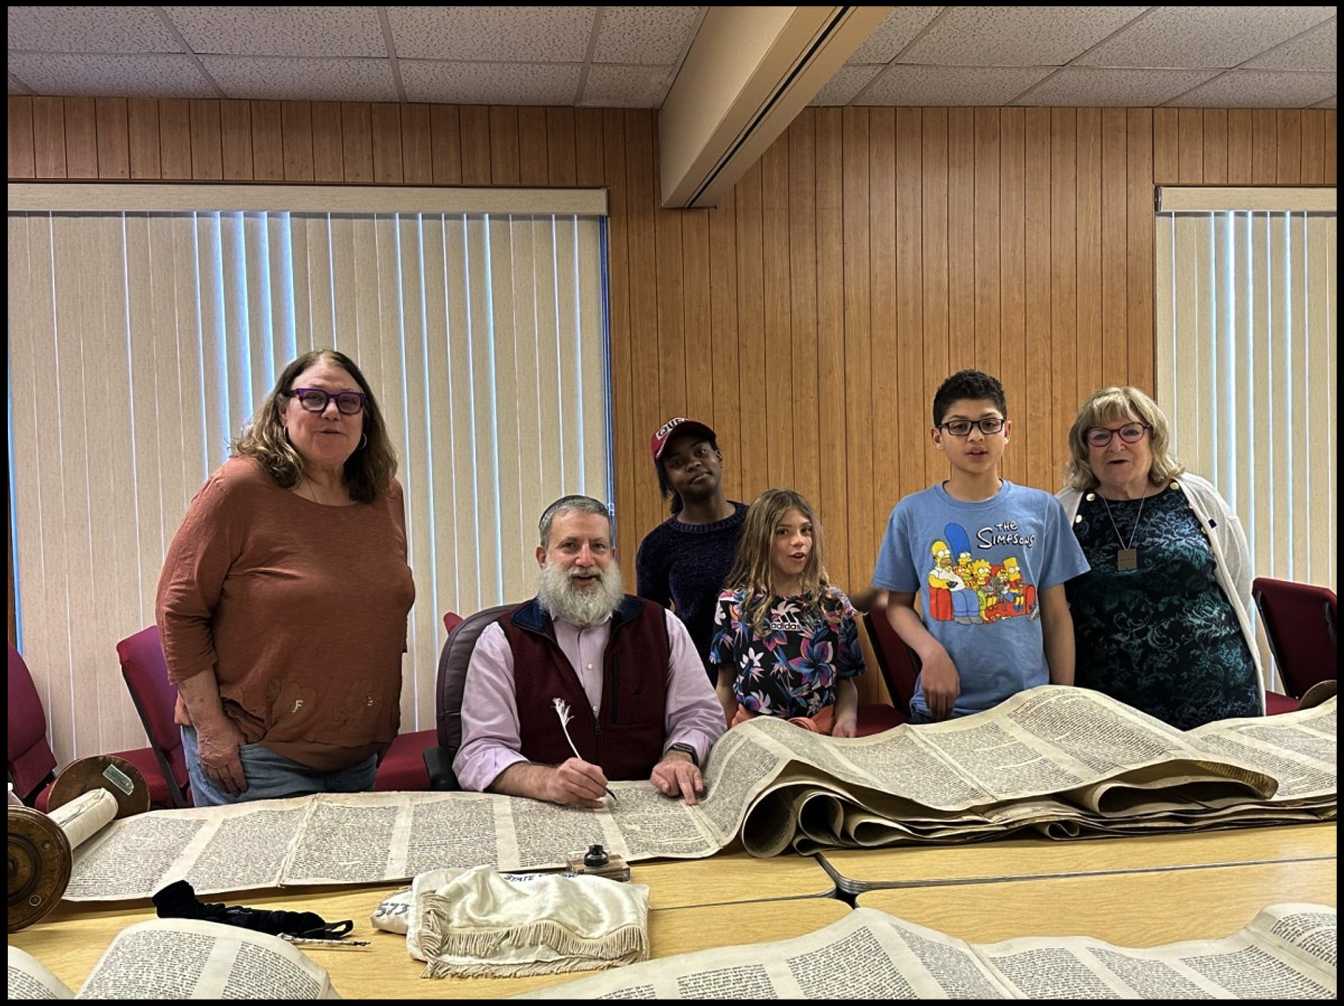 “Sofer On Site” from Miami, FL came to inspect and repair several torahs for Shir Tikvah. The Hebrew School students were able to go back and observe the process as Rabbi Druin was working.